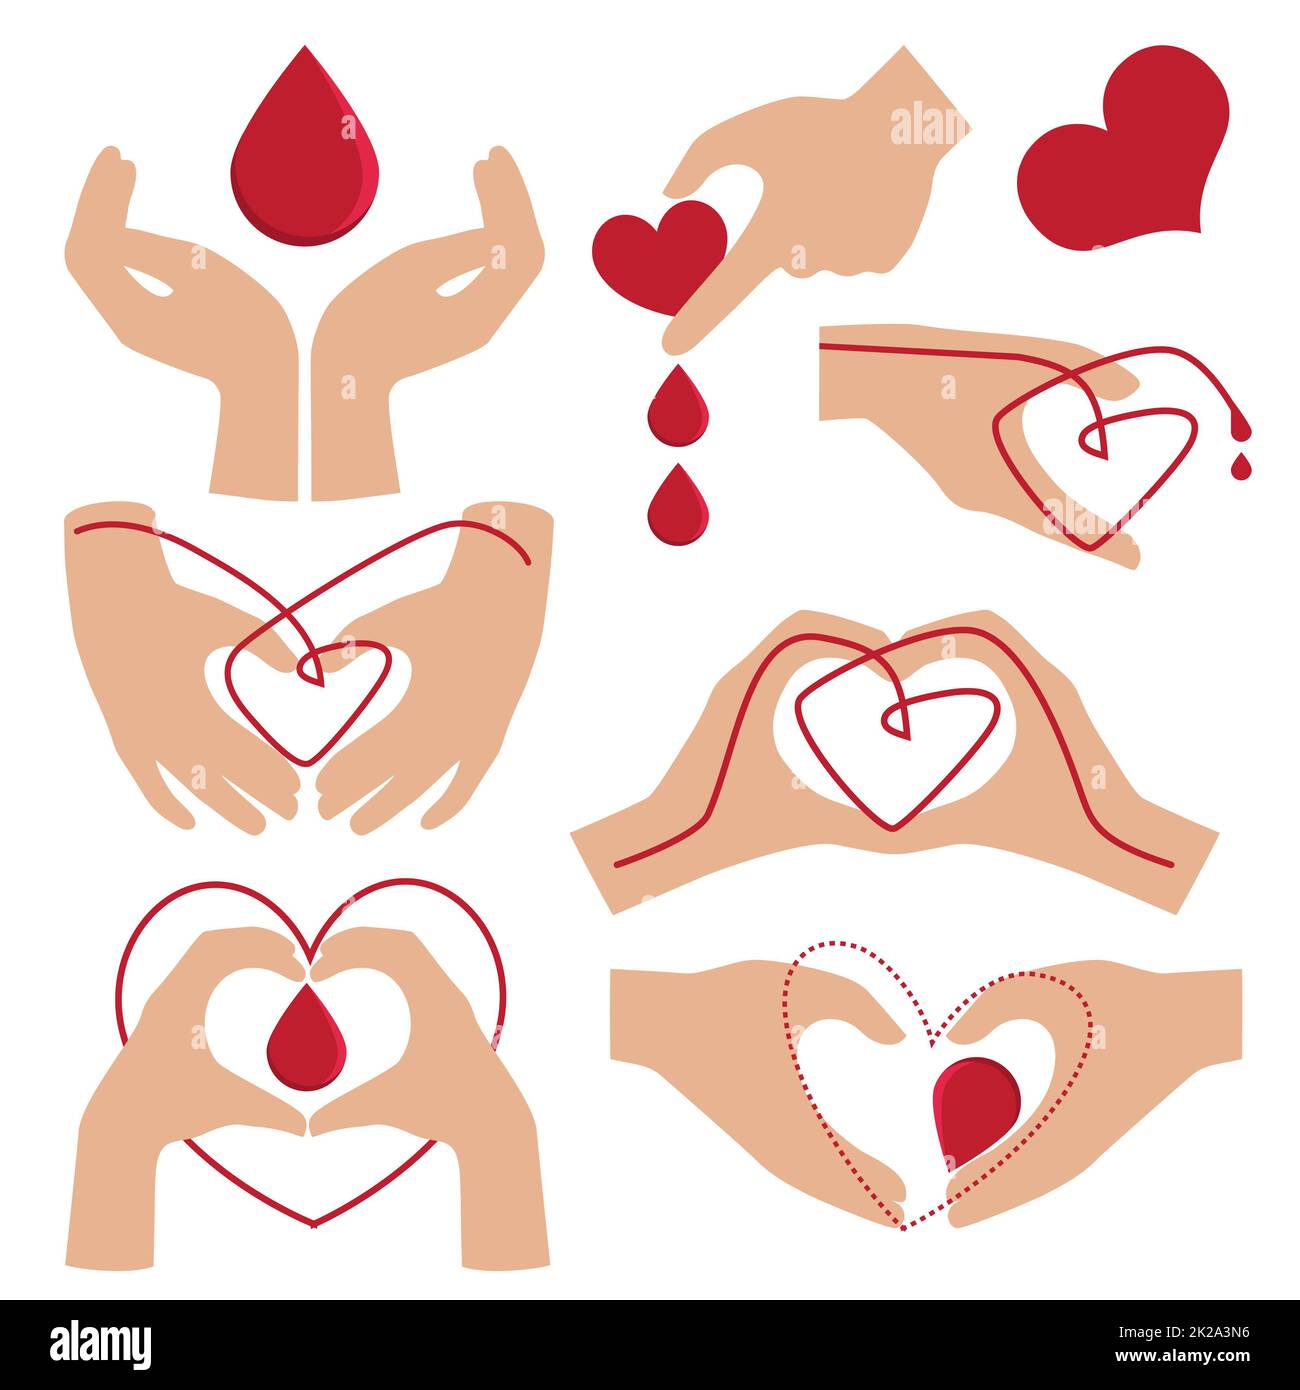 Hands with heart shape on red background illustration,Blood Donation, blood donor background, Medical background. Human donates blood Stock Photo